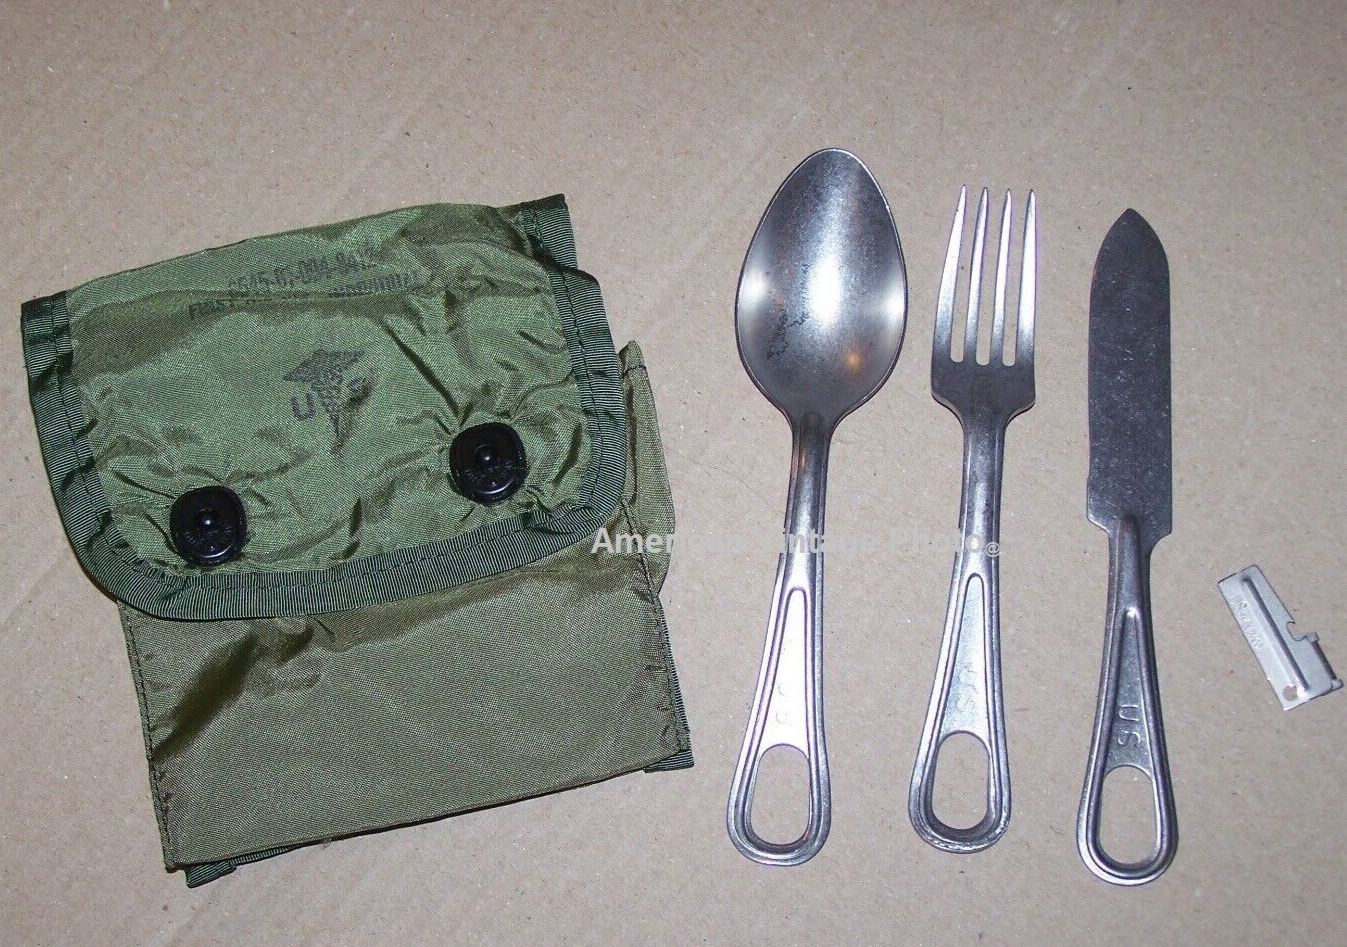 Mess Spoon Fork Knife Utensil & P38 USA Military USMC in Medic Pouch Case USA